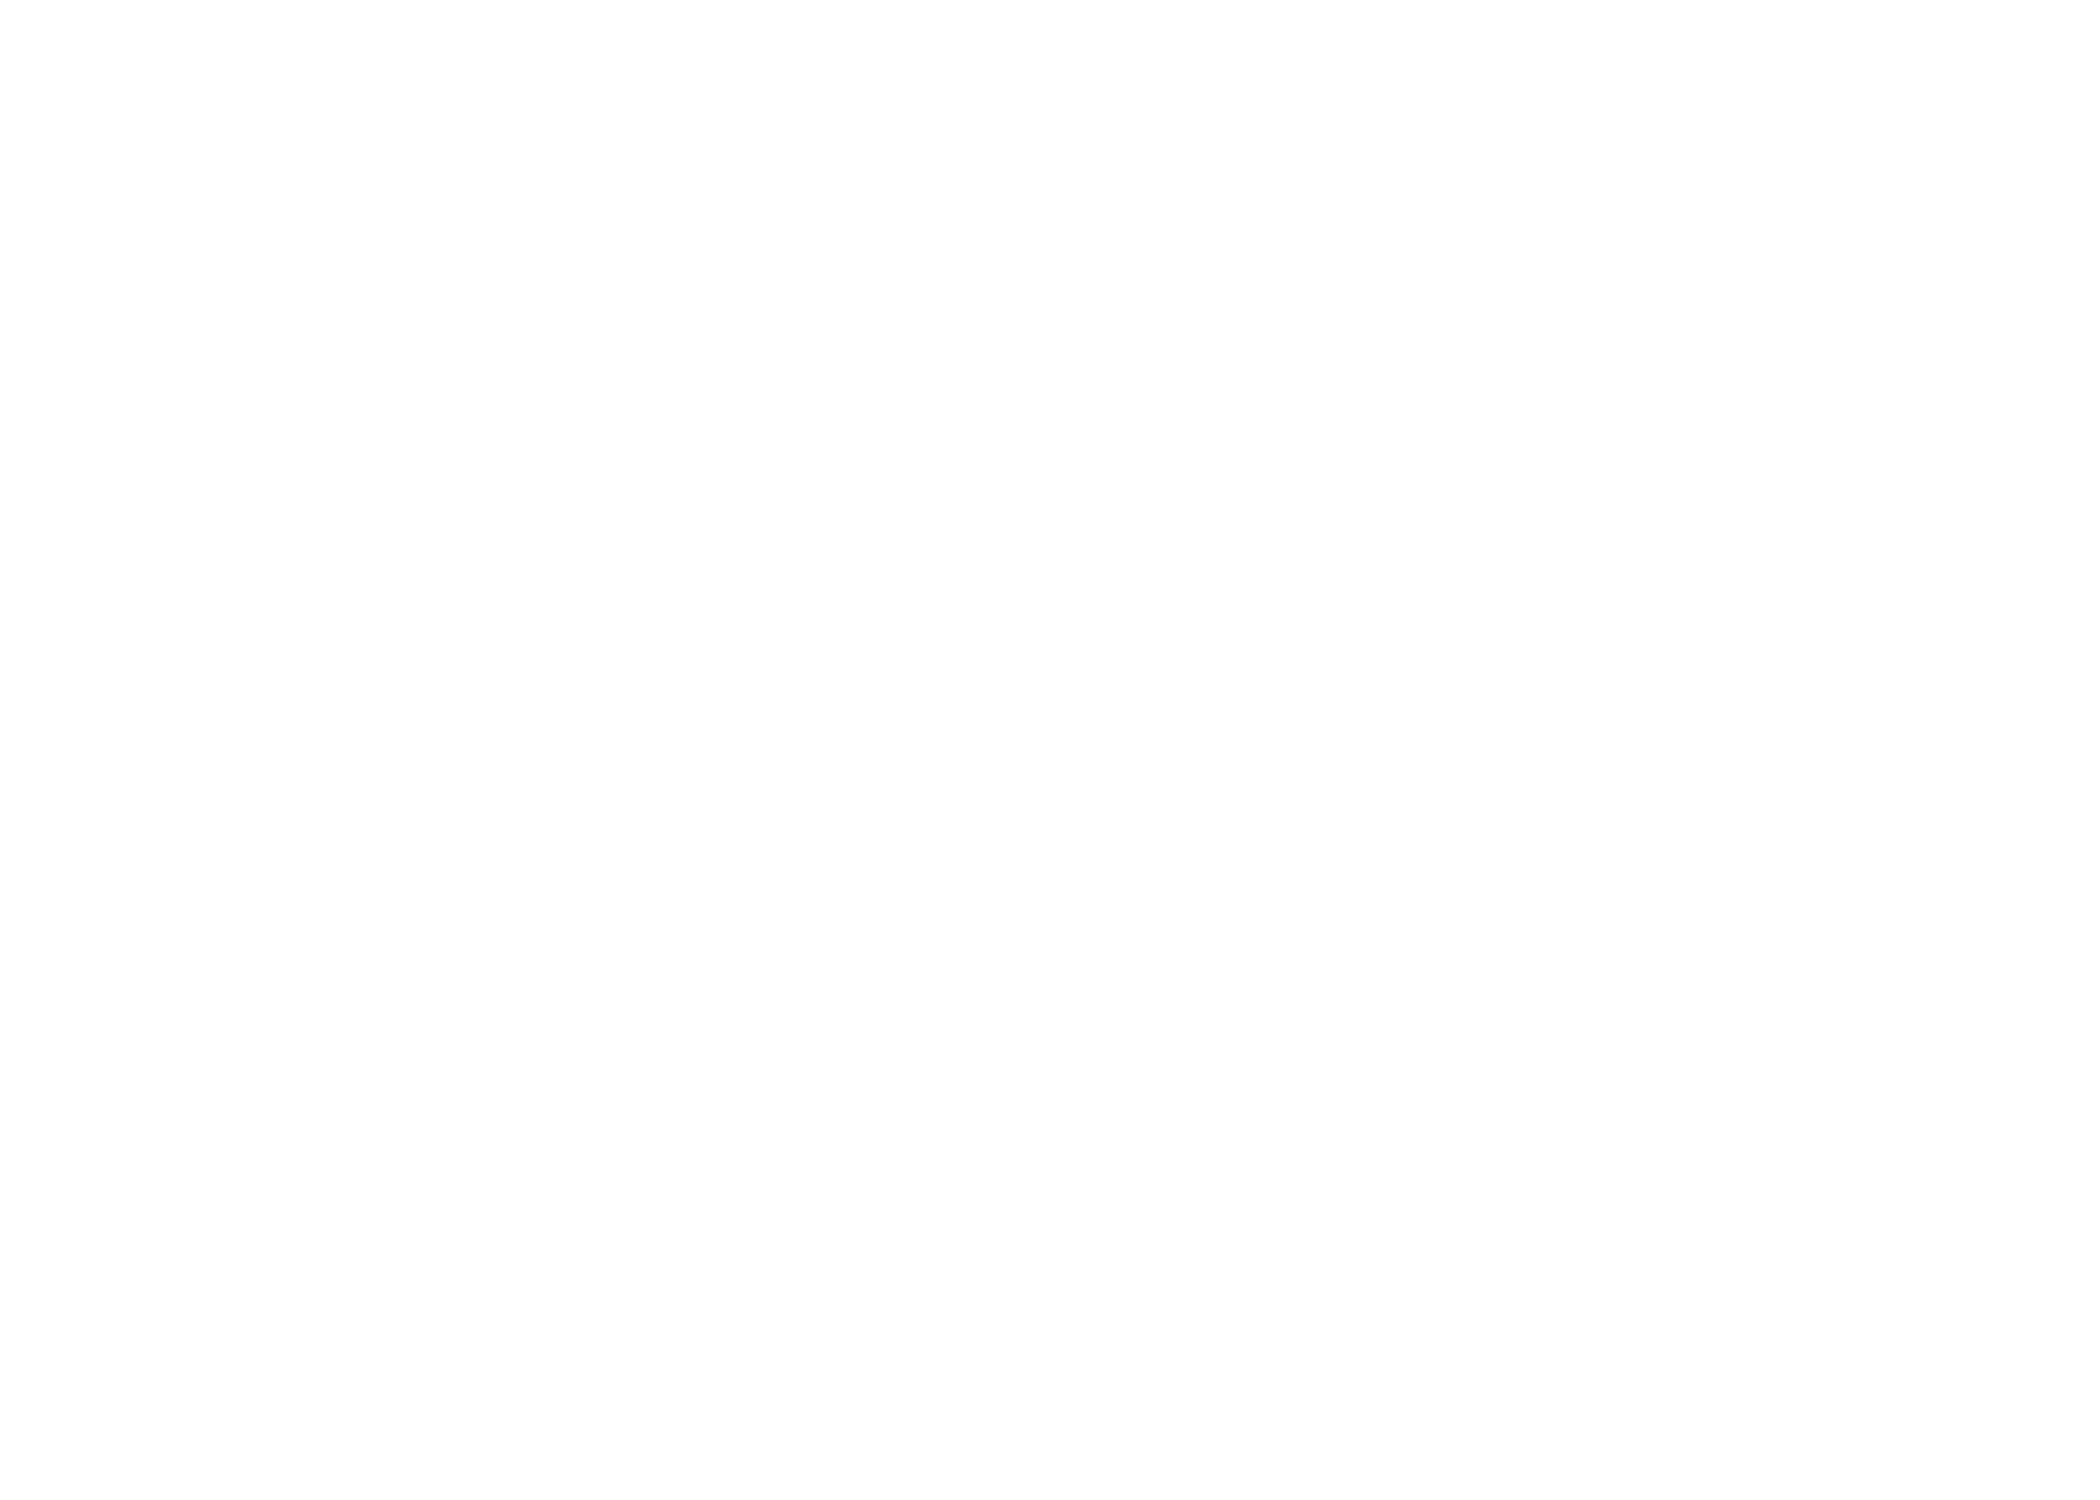 Free Gift Graphic 5